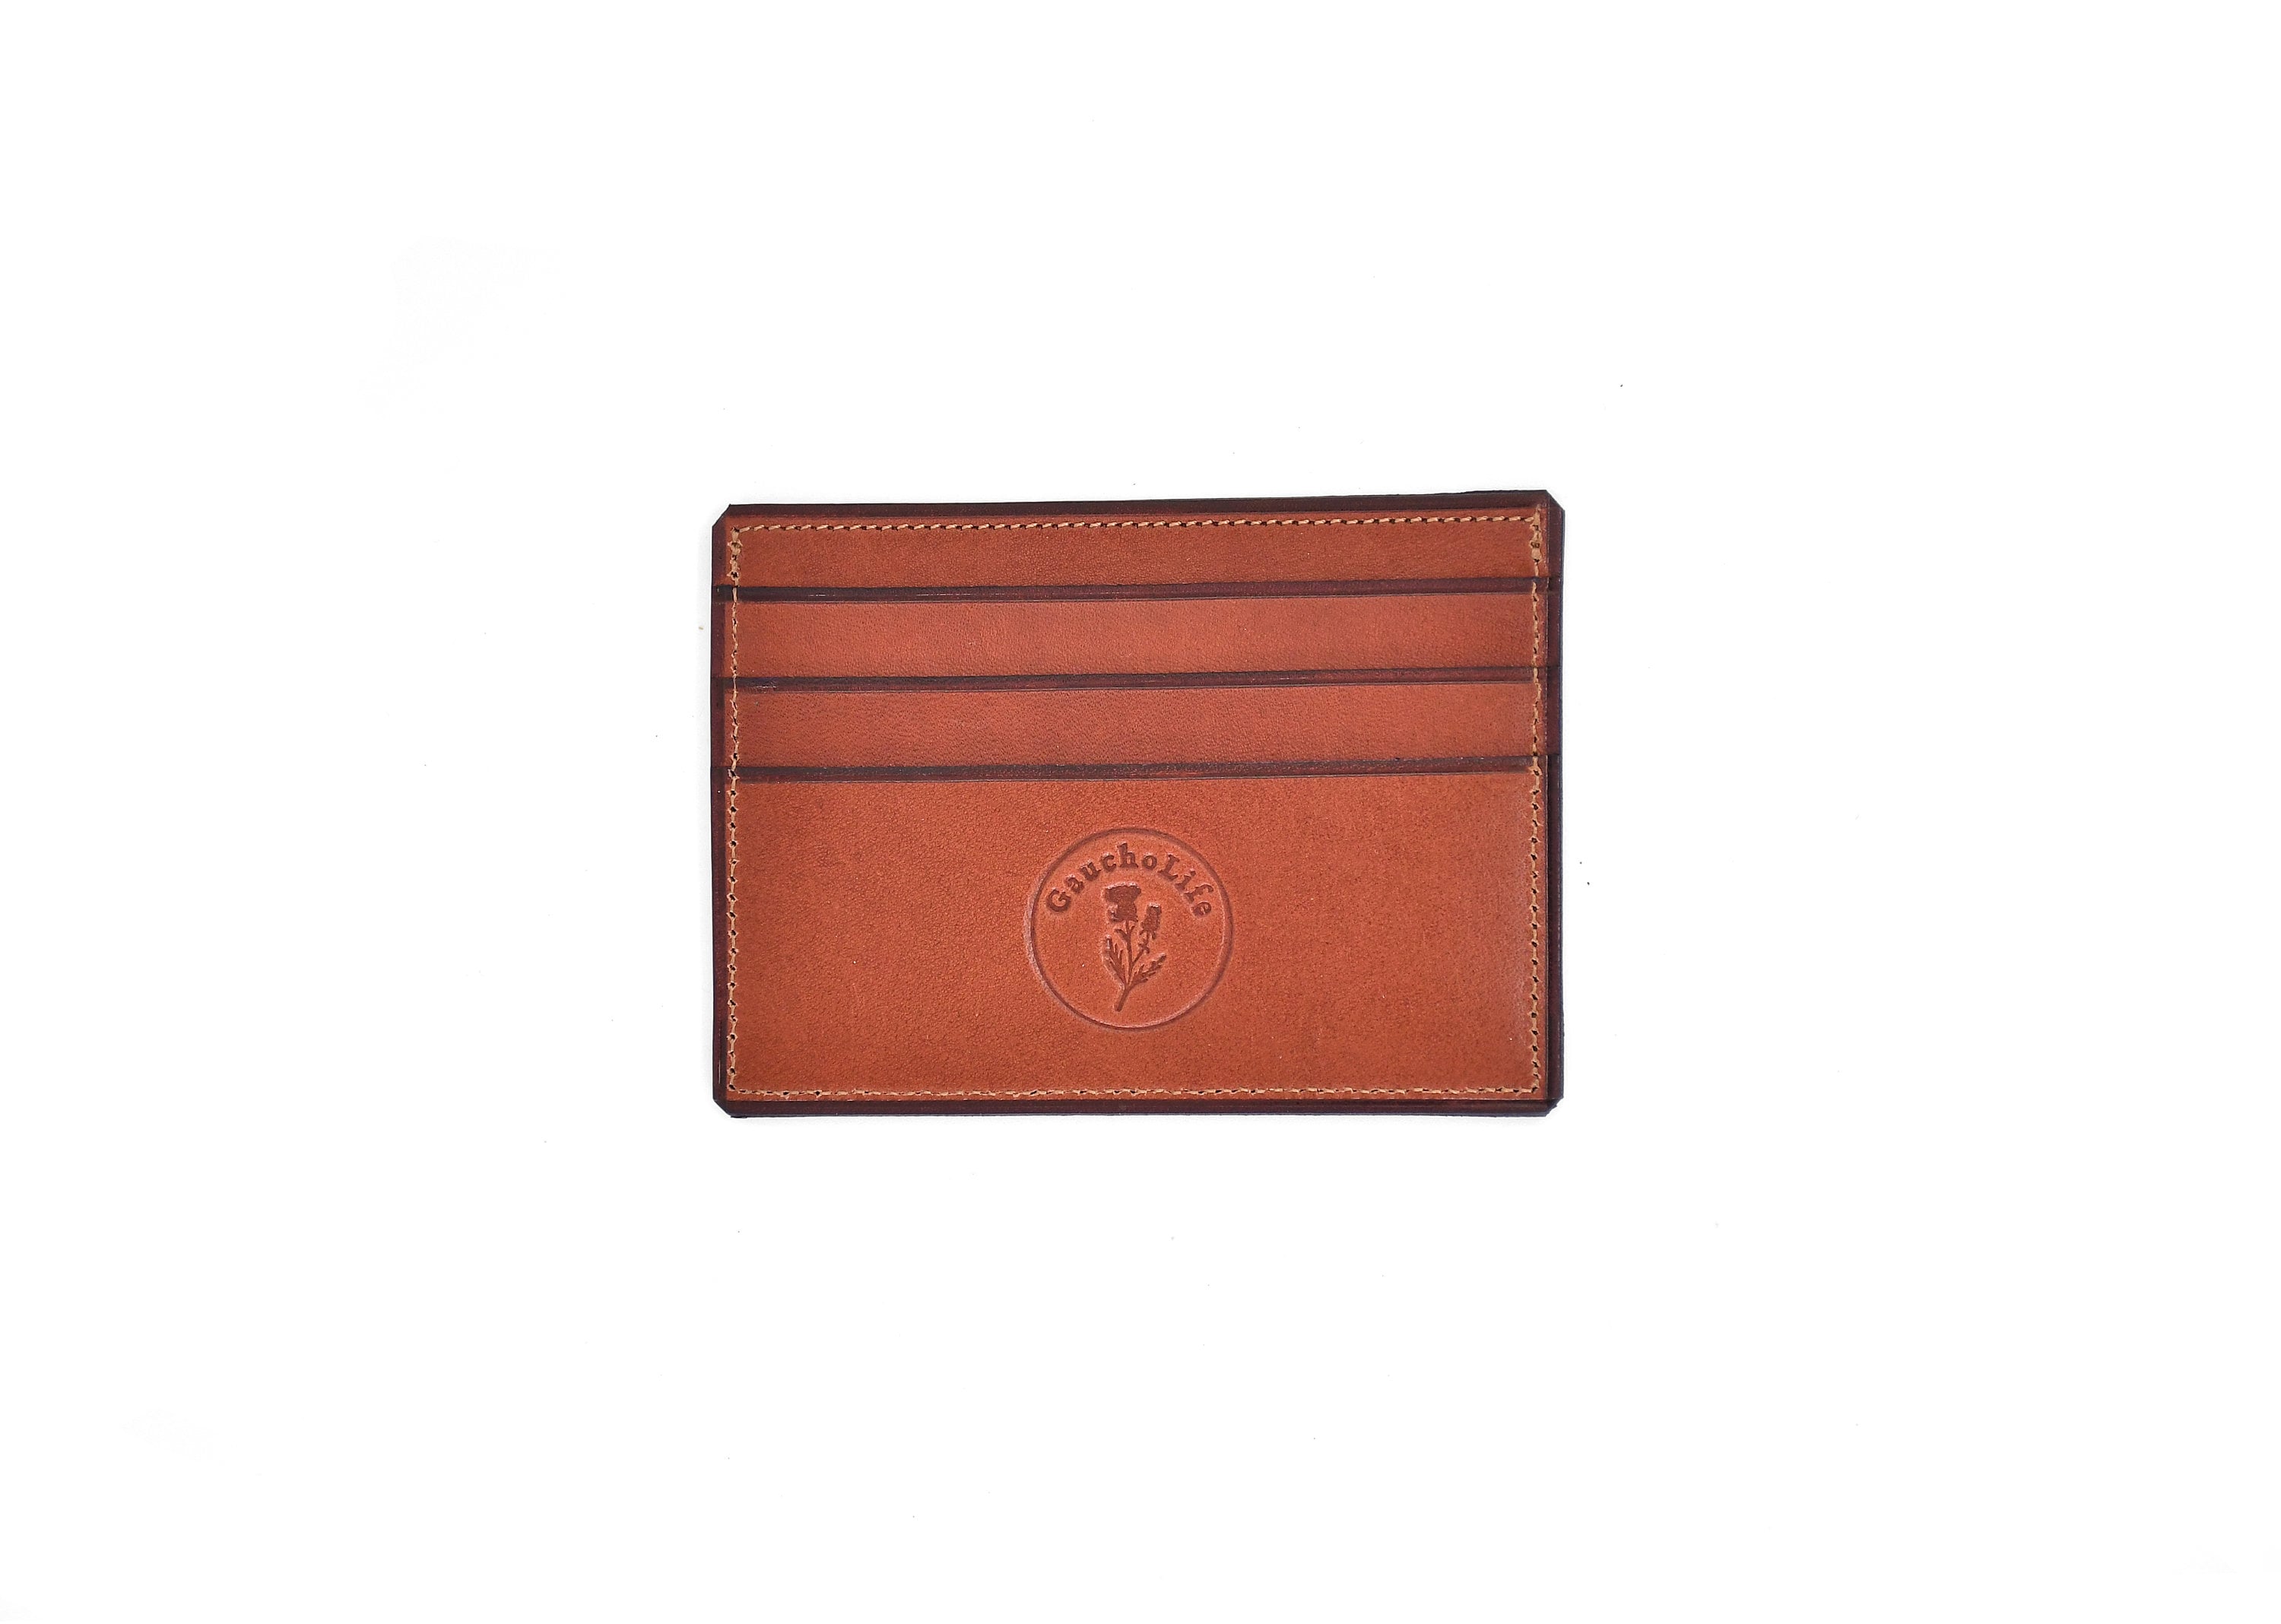 Gaucholife Wallet Thin Woven Leather Card Holder (Cross)